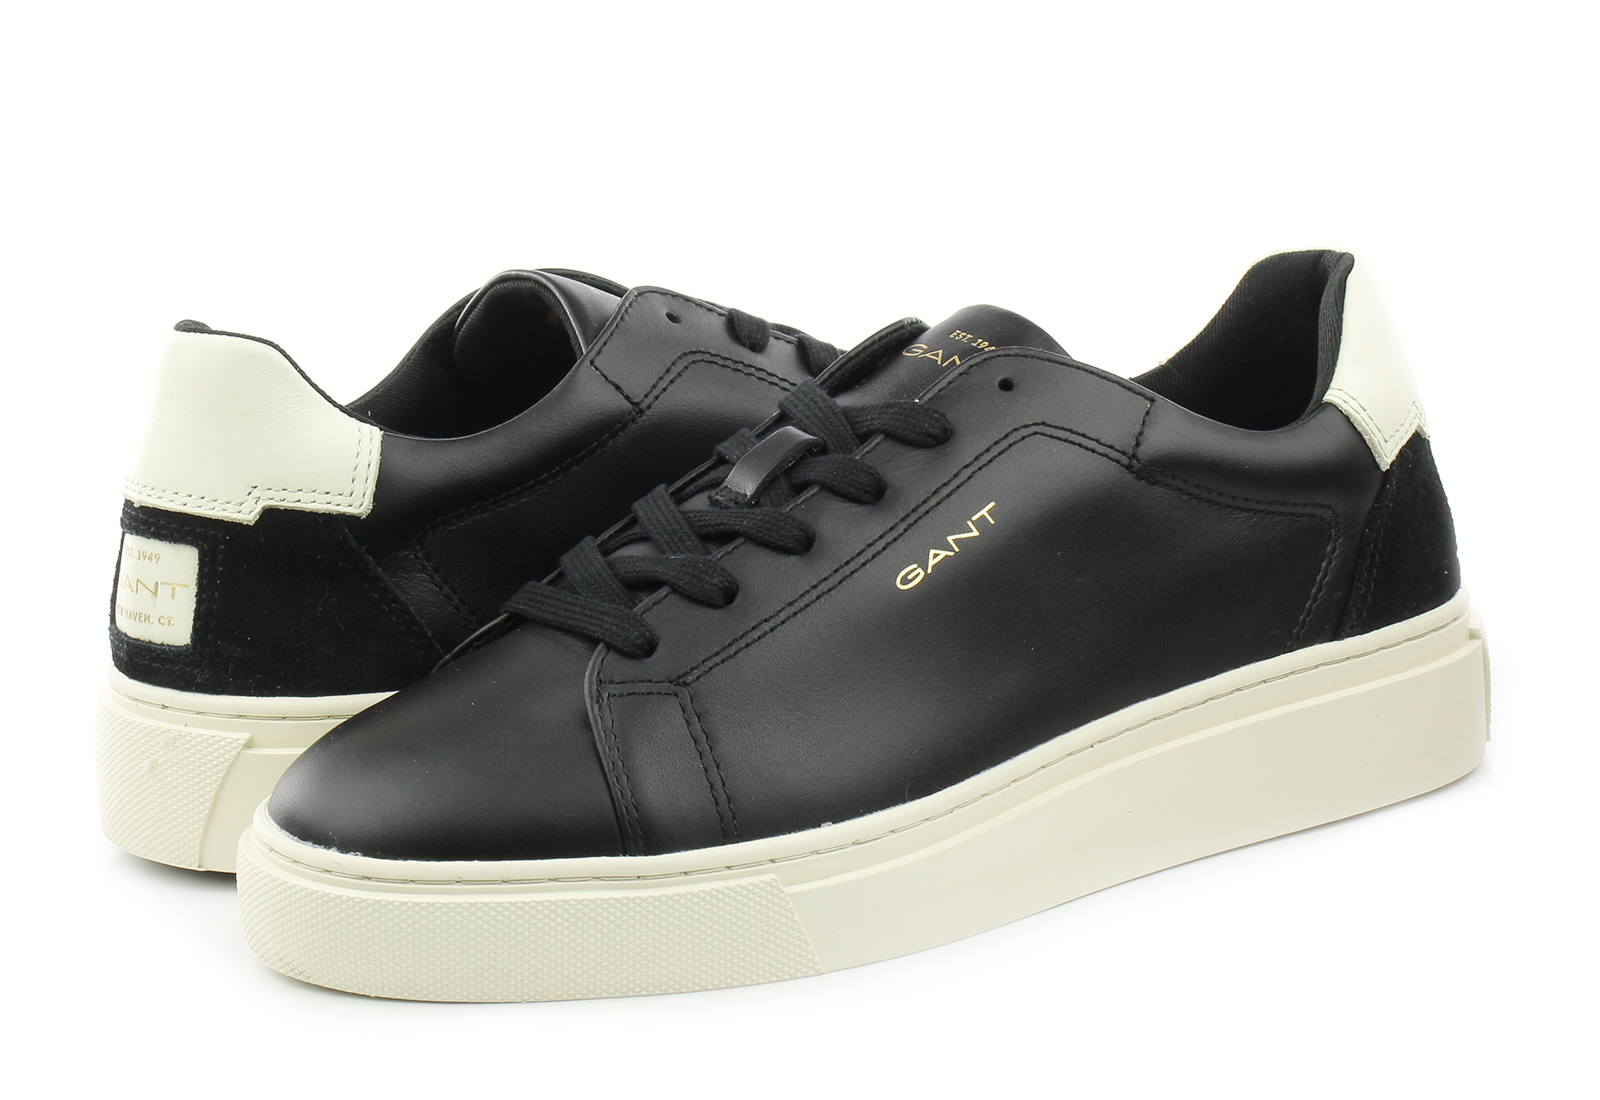 Gant Sneakers - Julice - 27531173-G00 - Office Shoes Romania